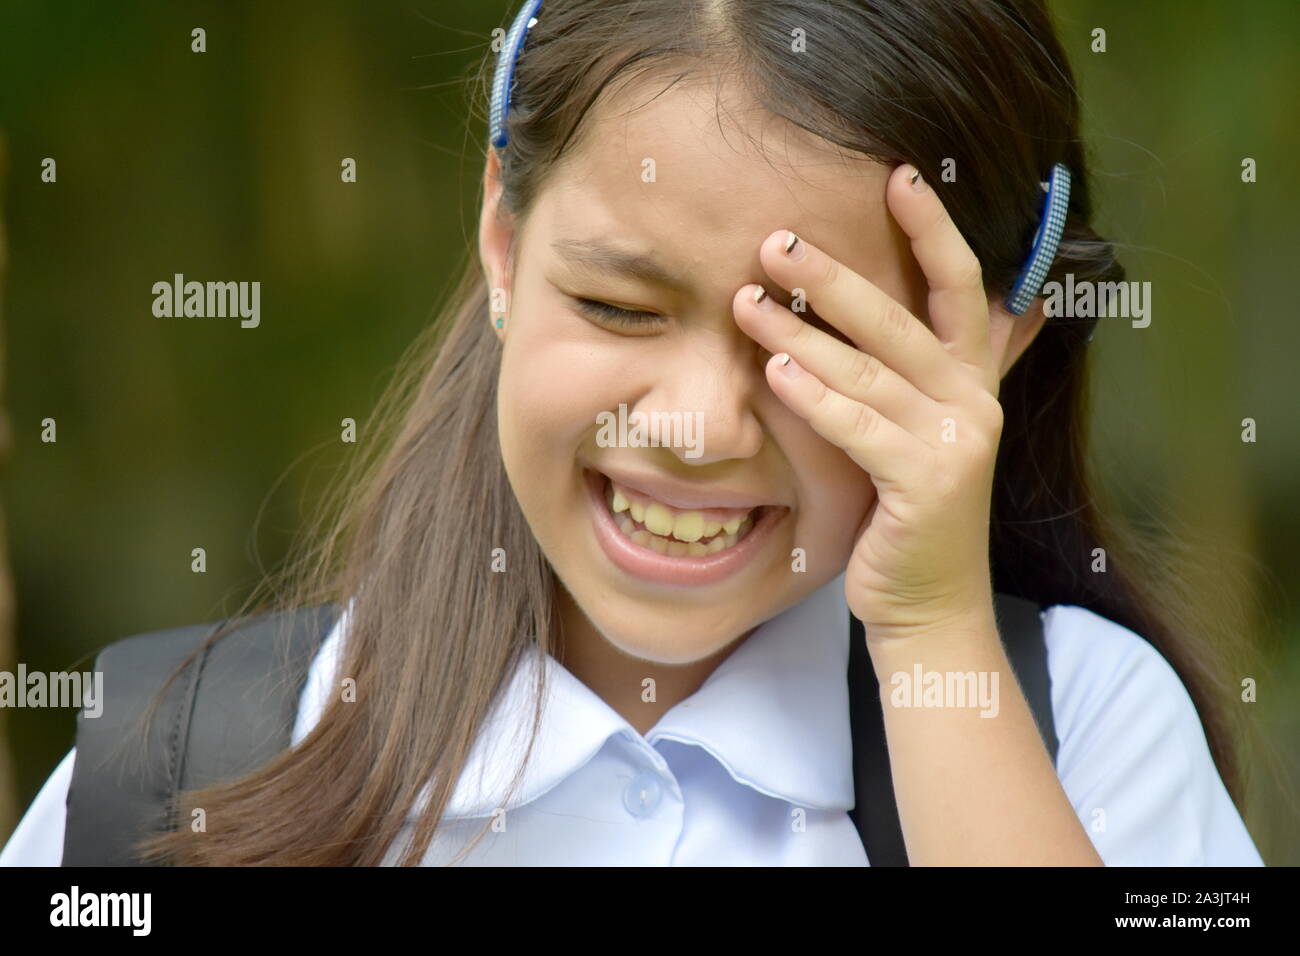 Crying Young Asian Girl Student With Books Stock Photo